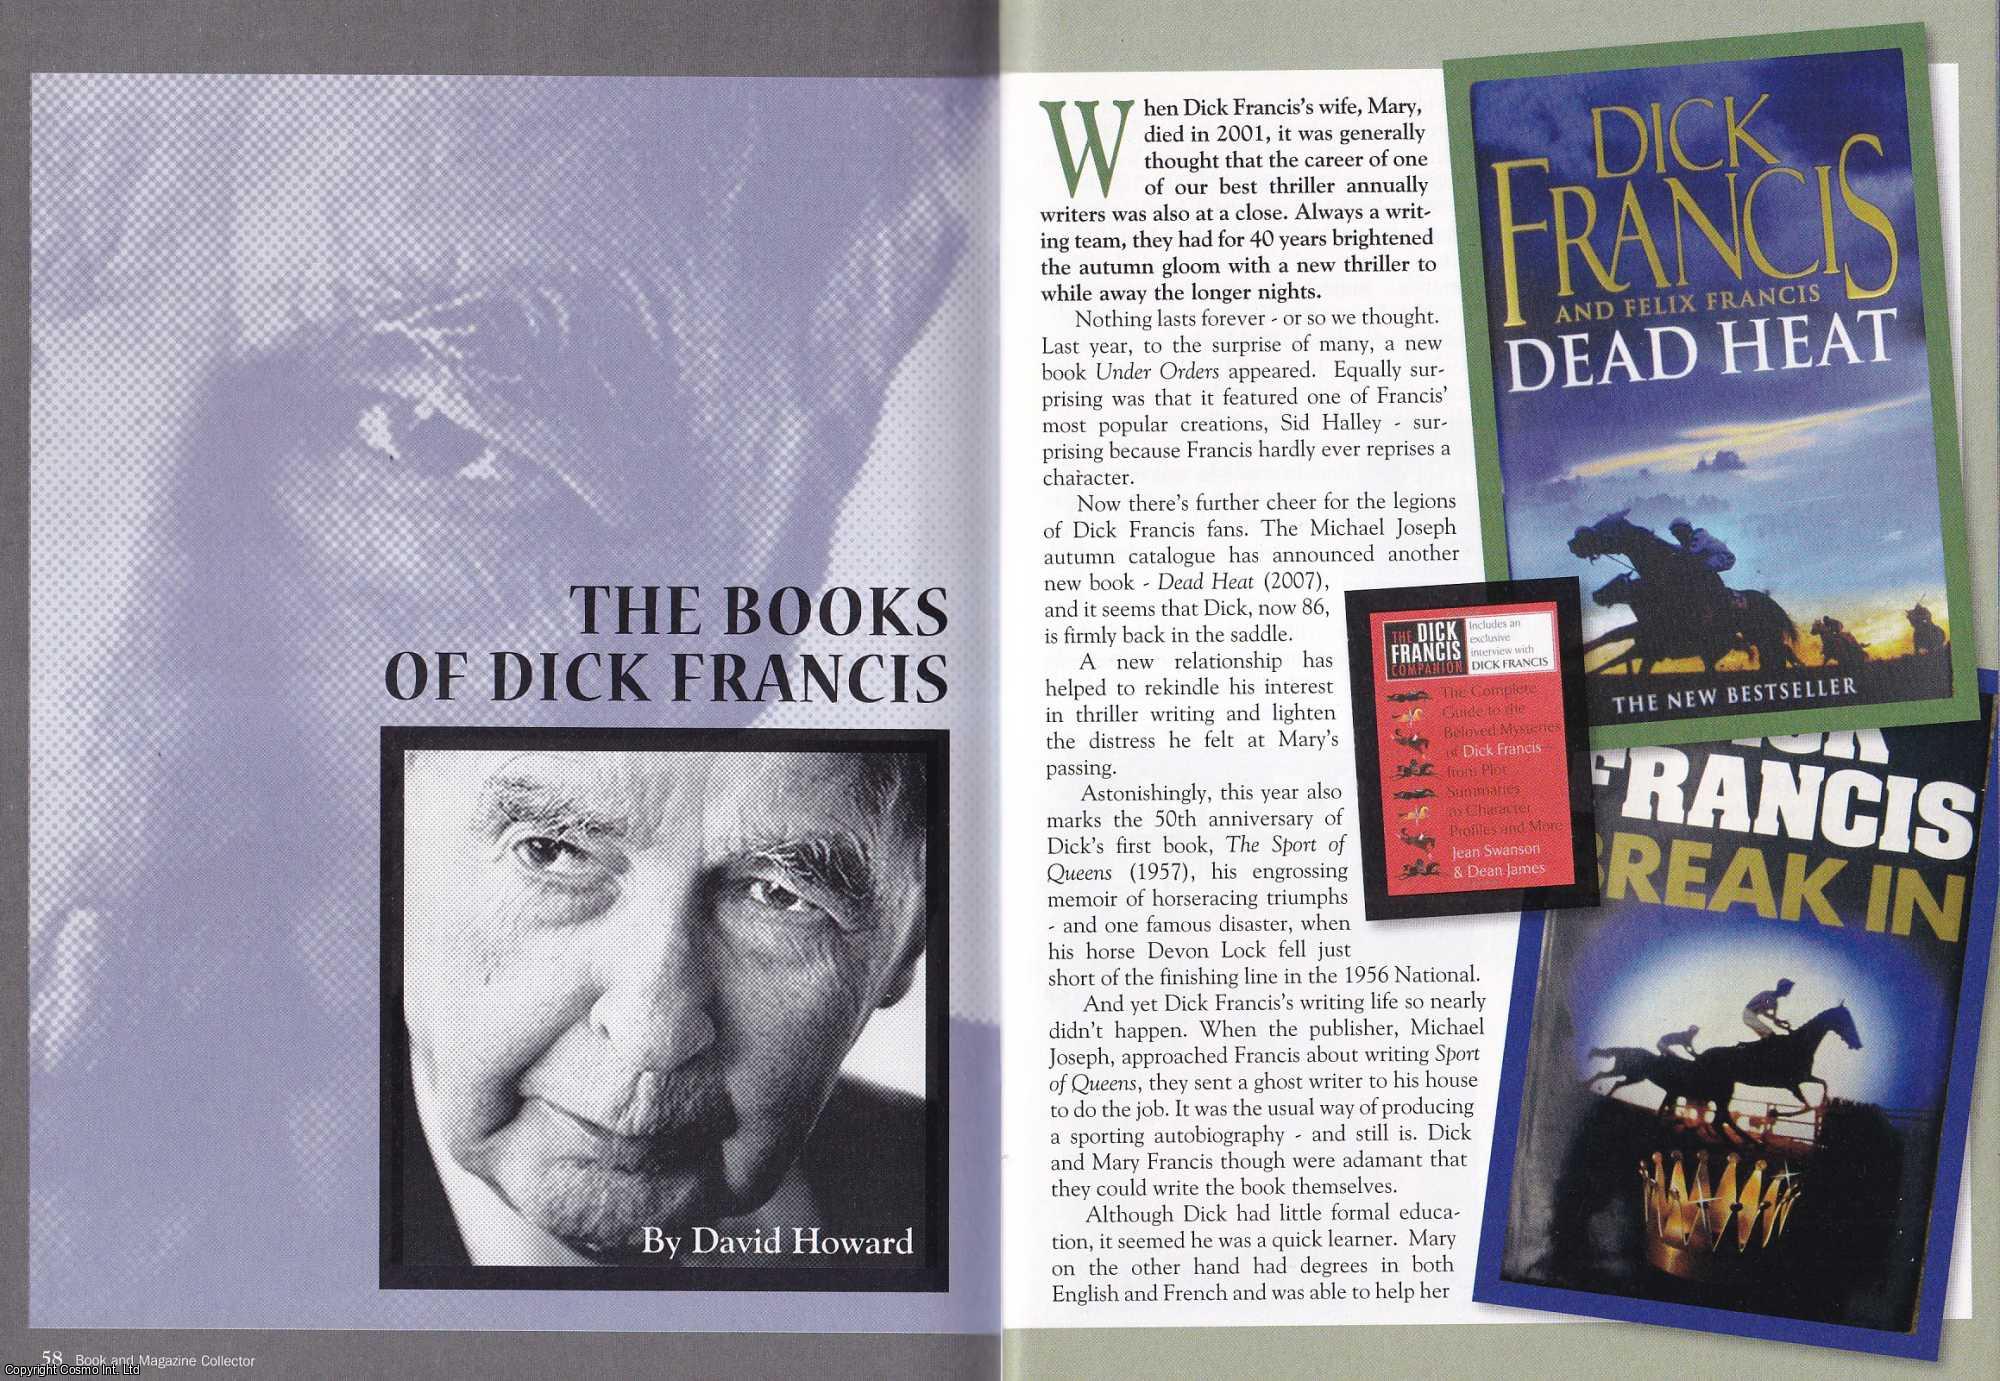 David Howard - The Books of Dick Francis. This is an original article separated from an issue of The Book & Magazine Collector publication, 2008.